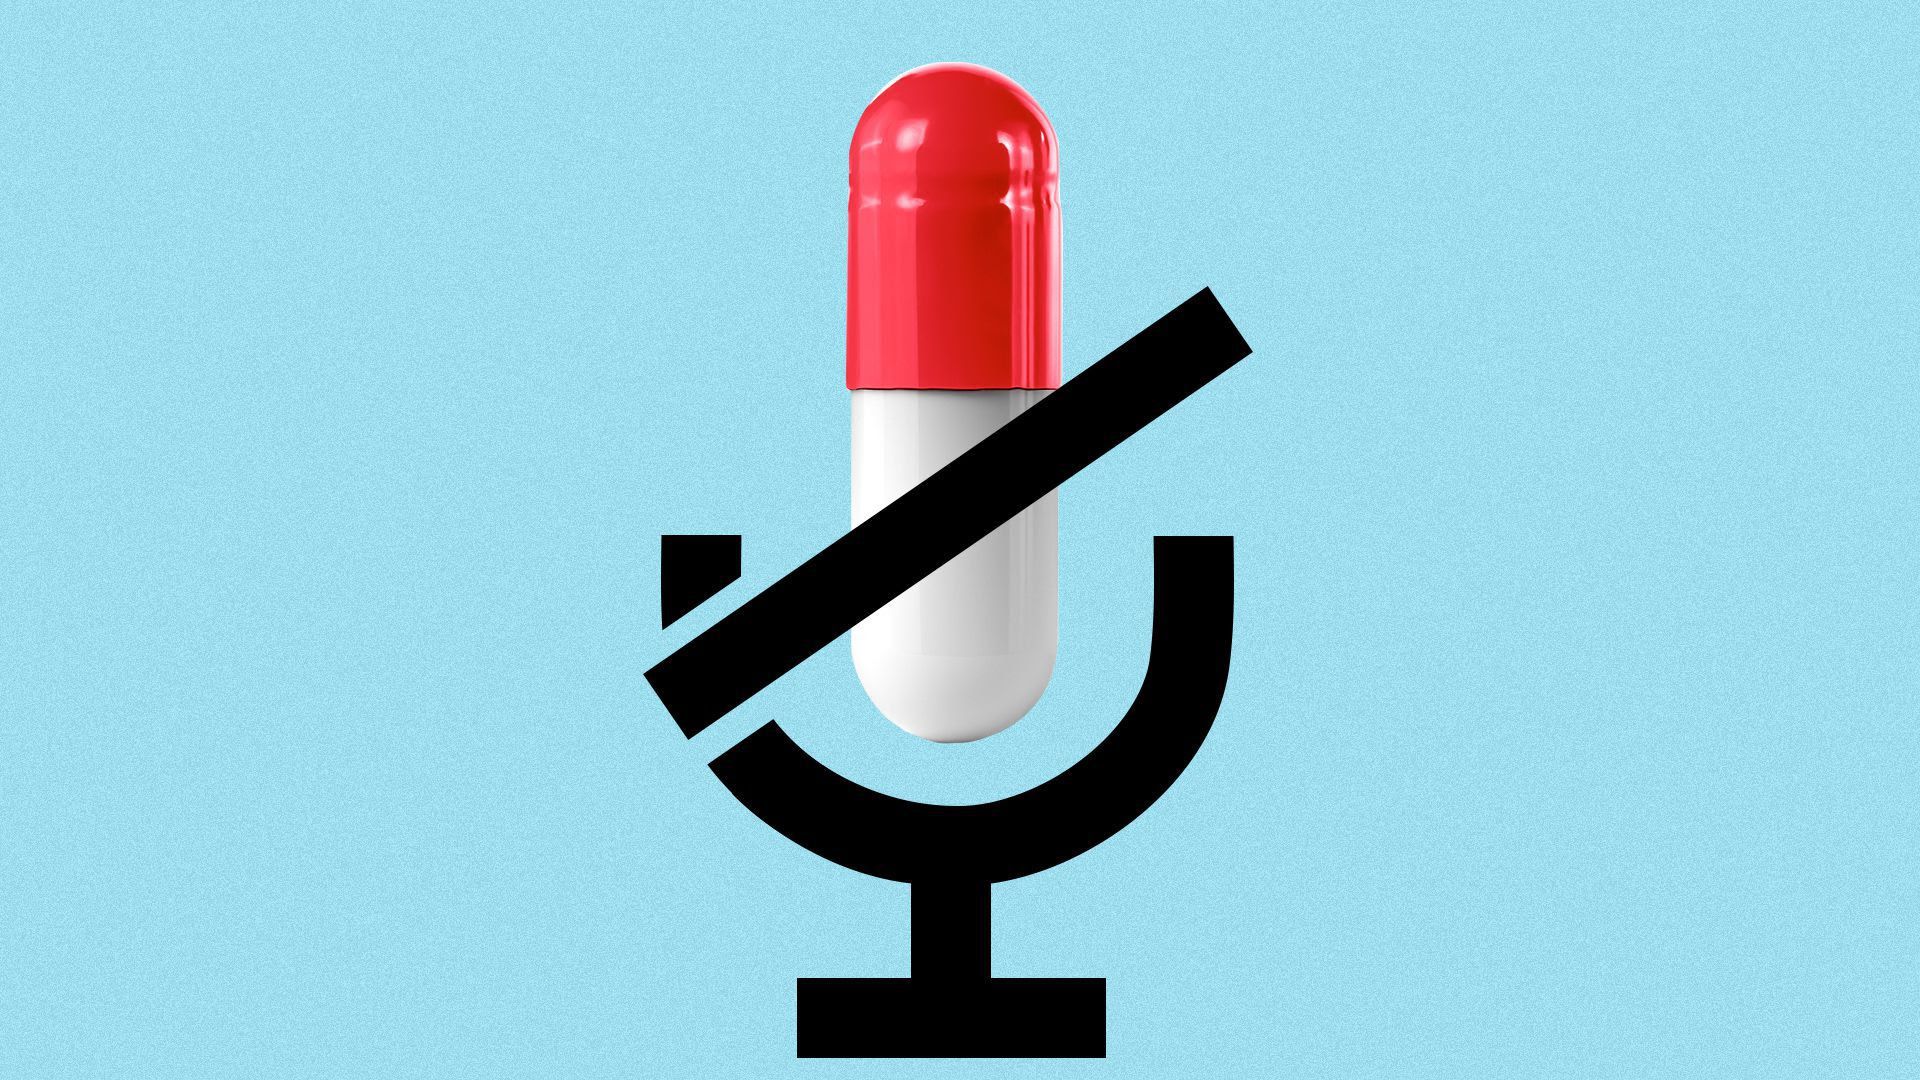 An illustration of a microphone that looks like a pill